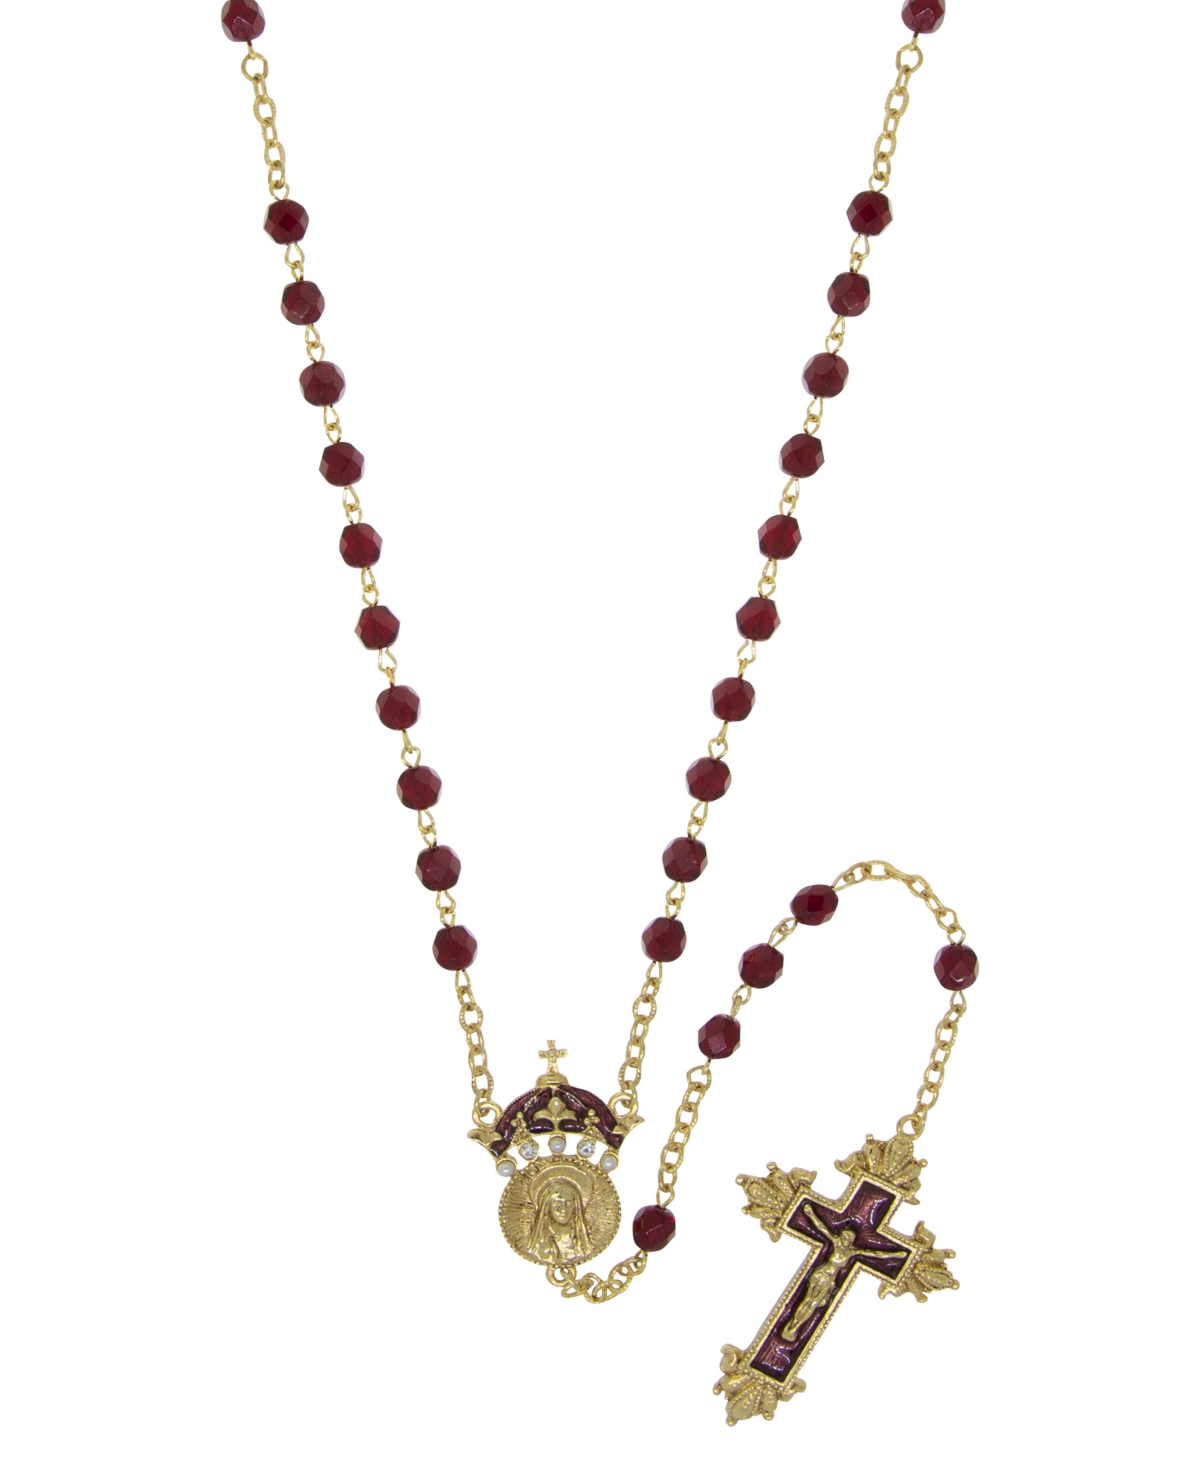 14K Gold-Tone Red Bead and Enamel "King of Kings" Rosary - Red